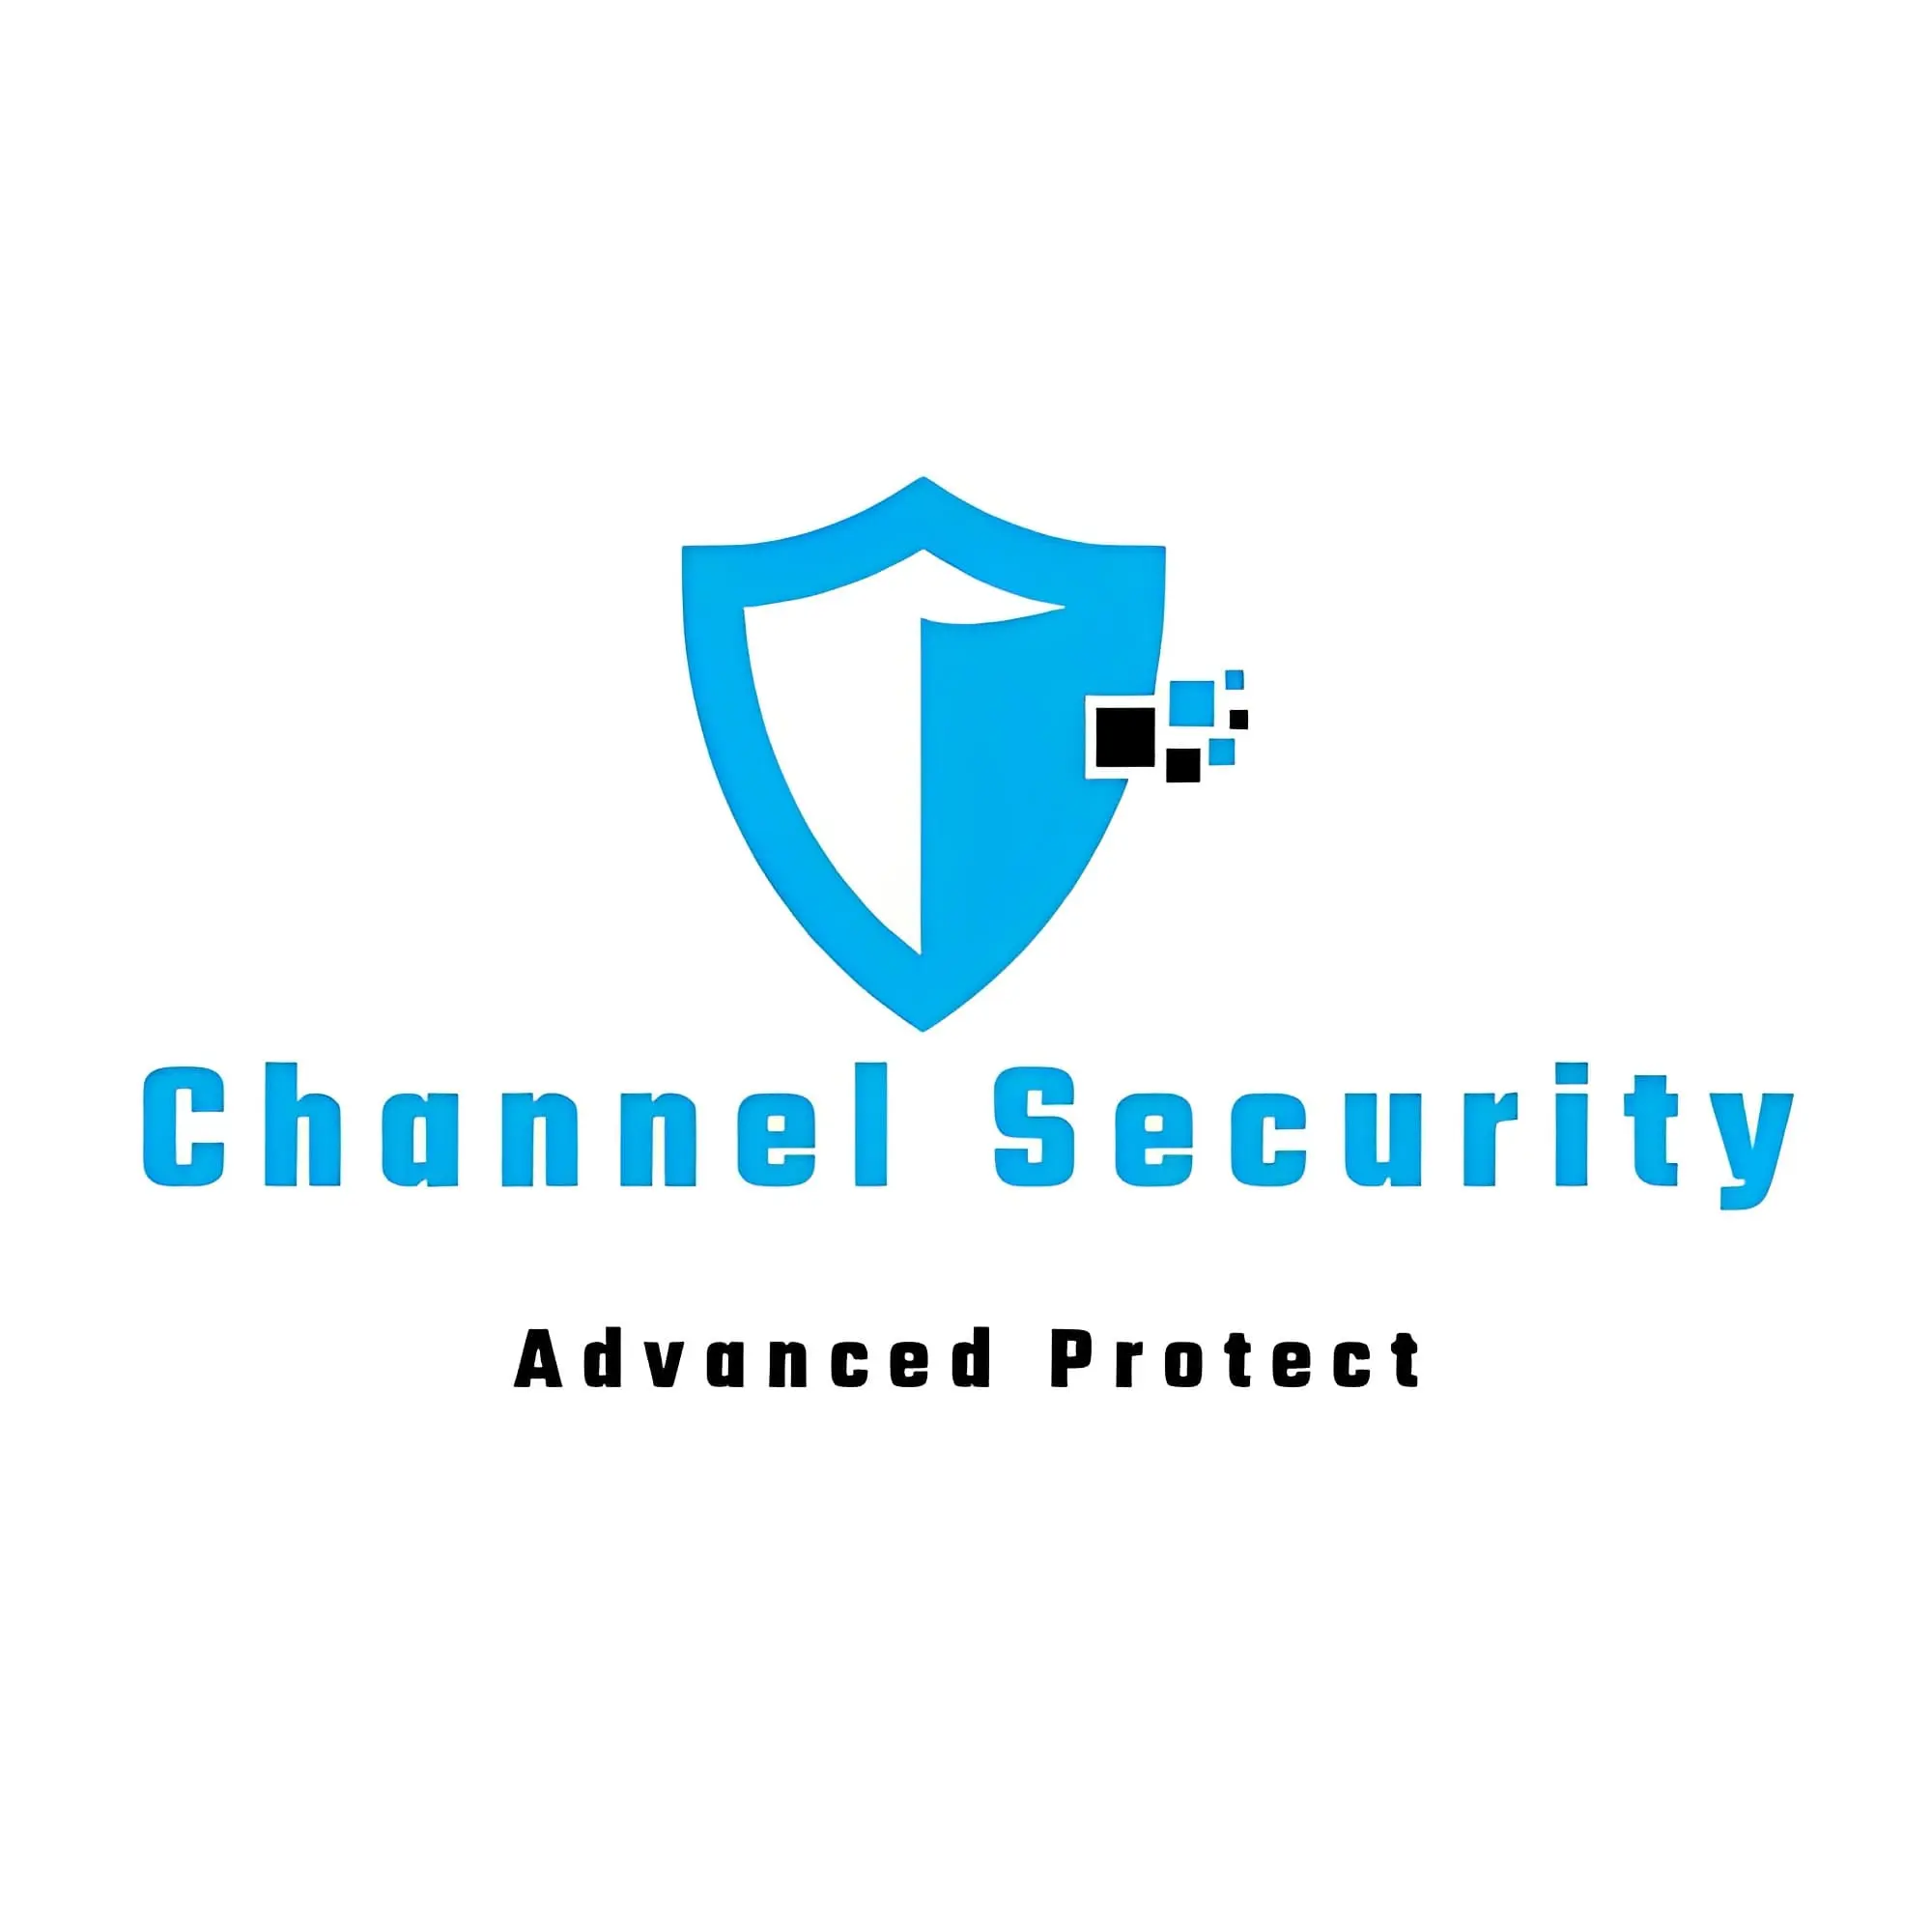 Channel Security